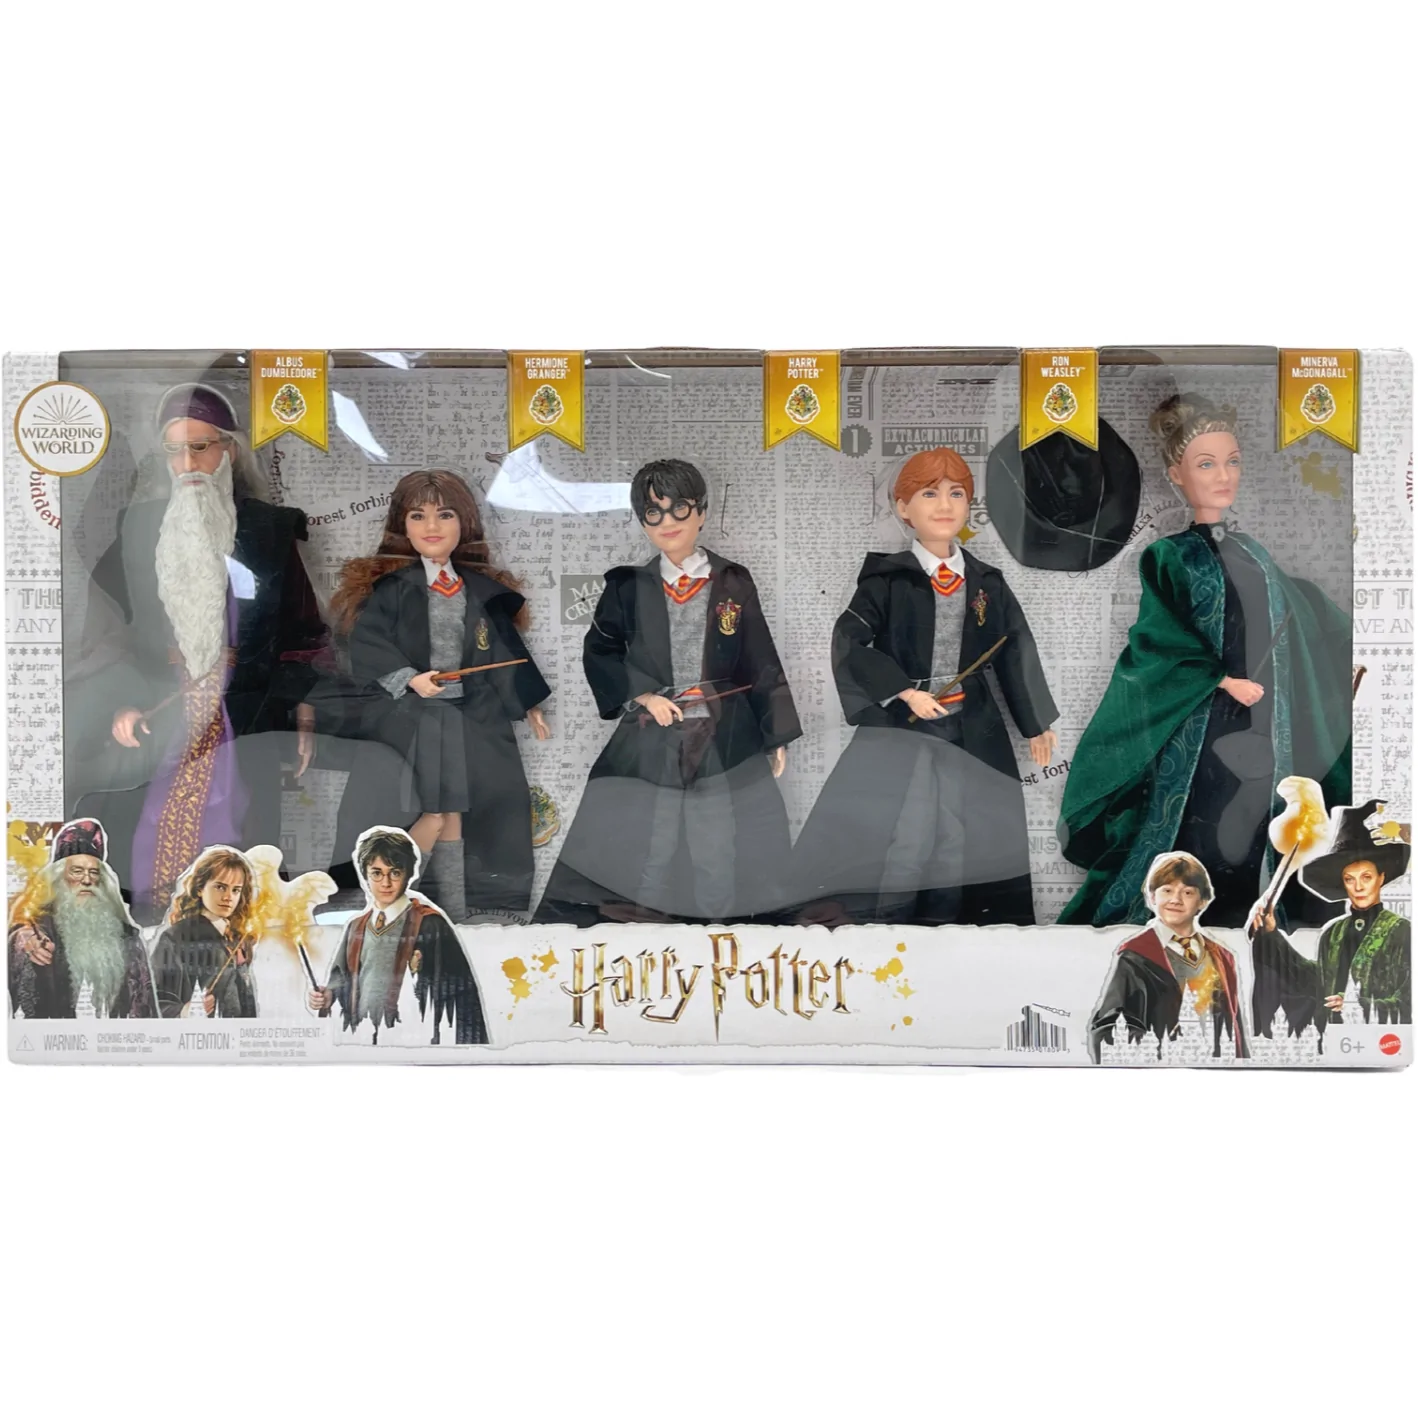 Harry Potter Wizarding World Character Set / 5 Character Set / Action Figures with Accessories